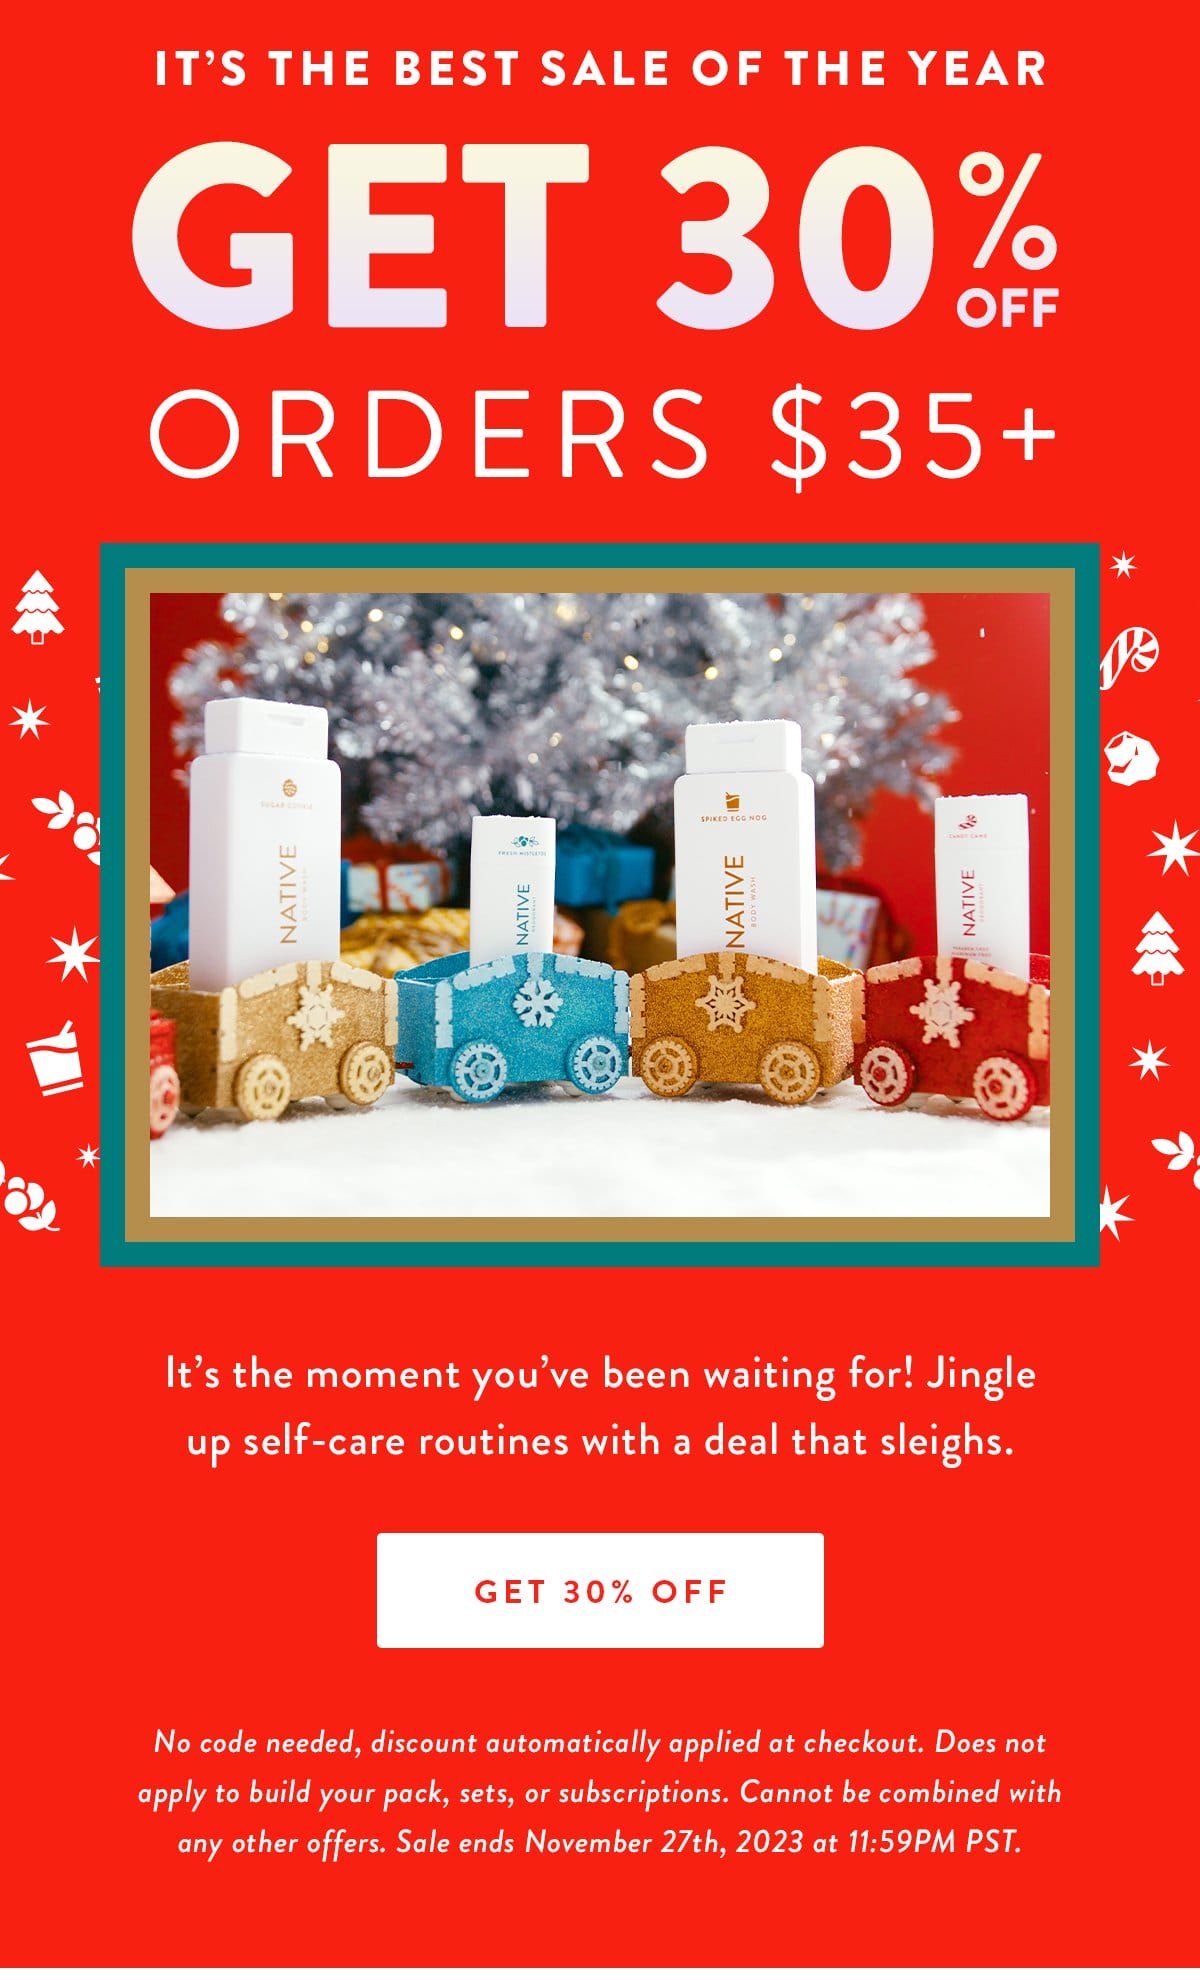 IT’S THE BEST SALE OF THE YEAR | GET 30% OFF orders \\$35+ | It’s the moment you’ve been waiting for! Jingle up self-care routines with a deal that sleighs. | GET 30% OFF | No code needed, discount automatically applied at checkout. Does not apply to build your pack, sets, or subscriptions. Cannot be combined with any other offers. Sale ends November 27th, 2023 at 11:59PM PST.